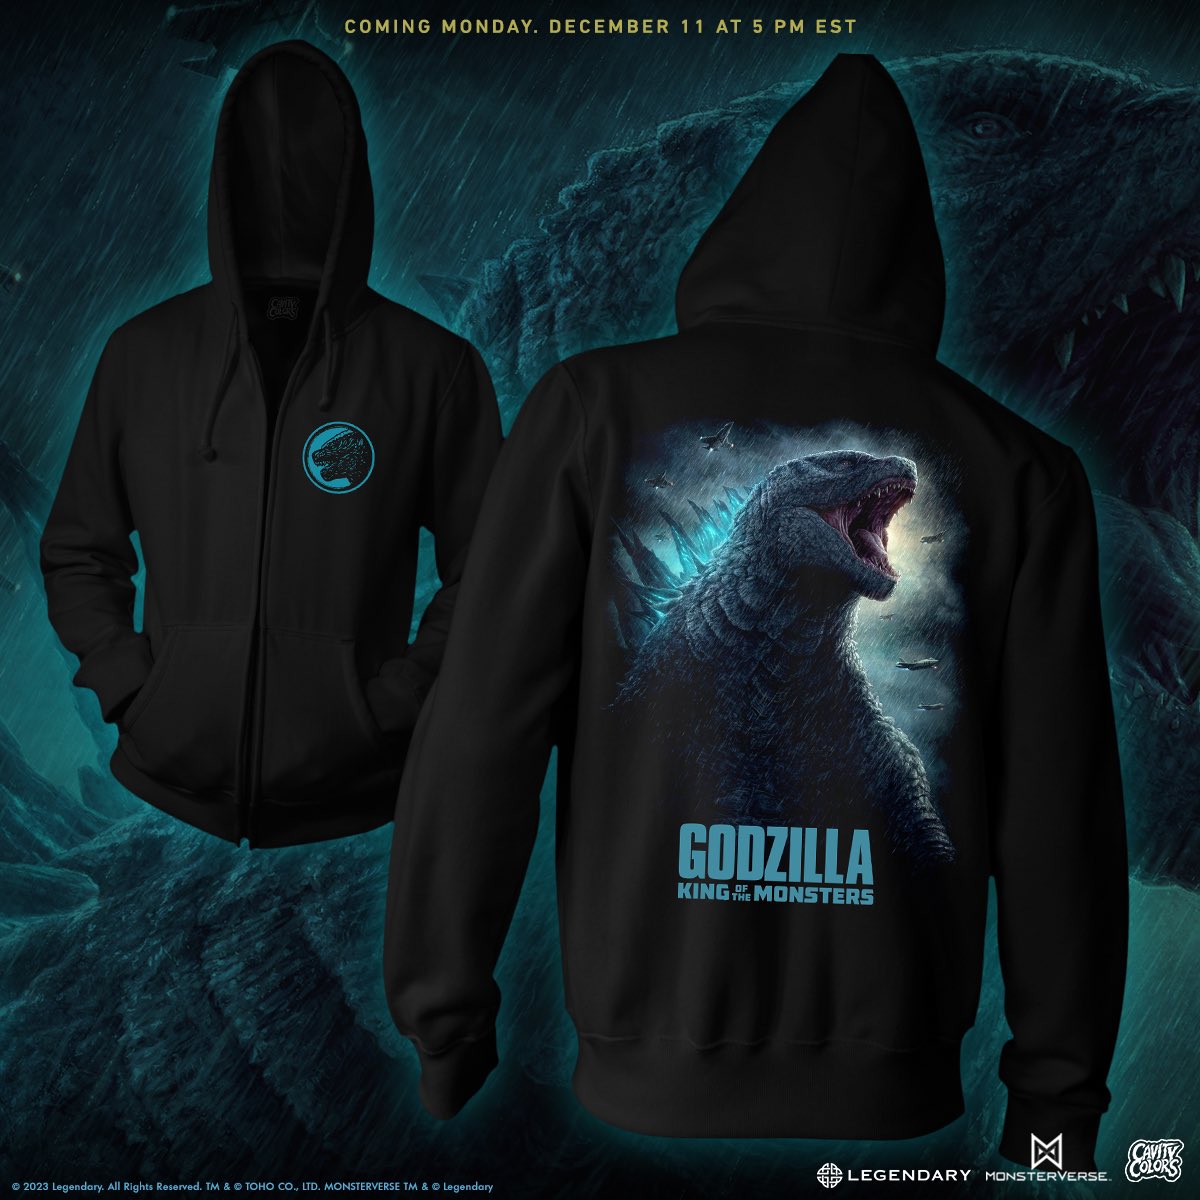 🔥⚡️ Who’s ready for a new GODZILLA hoodie? ⚡️🔥 Our new officially licensed GODZILLA: KING OF THE MONSTERS (2019) collection launches tomorrow (Monday at 5 PM EST) and features new designs celebrating this fan favorite #Monsterverse film! 👀